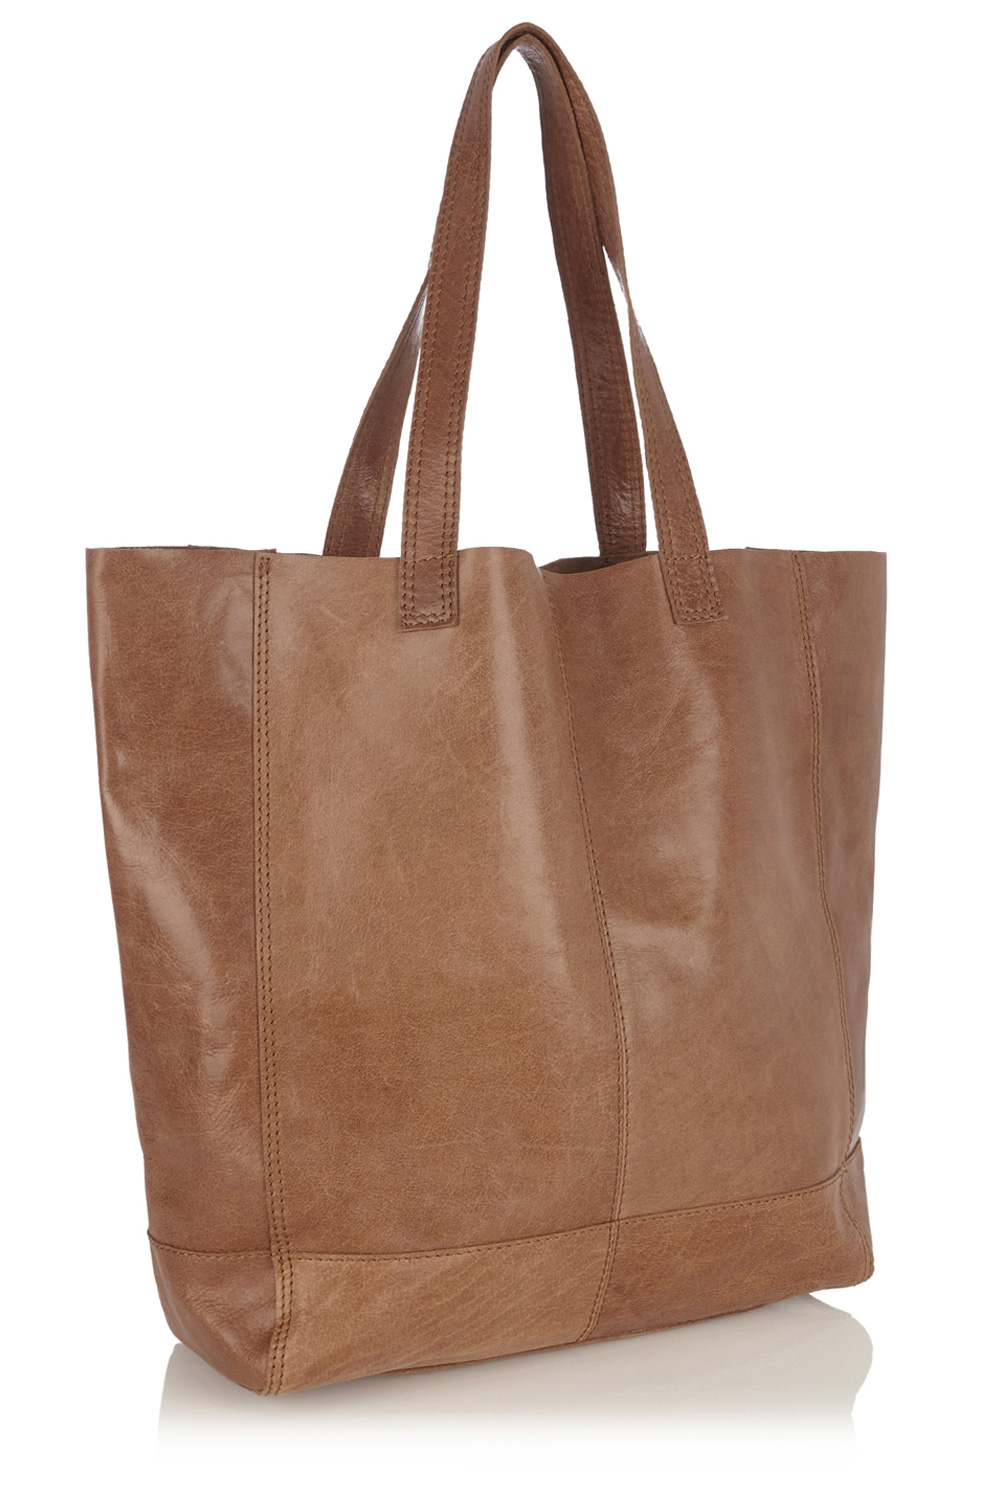 Leather Tote Shopper Bag | Bags More